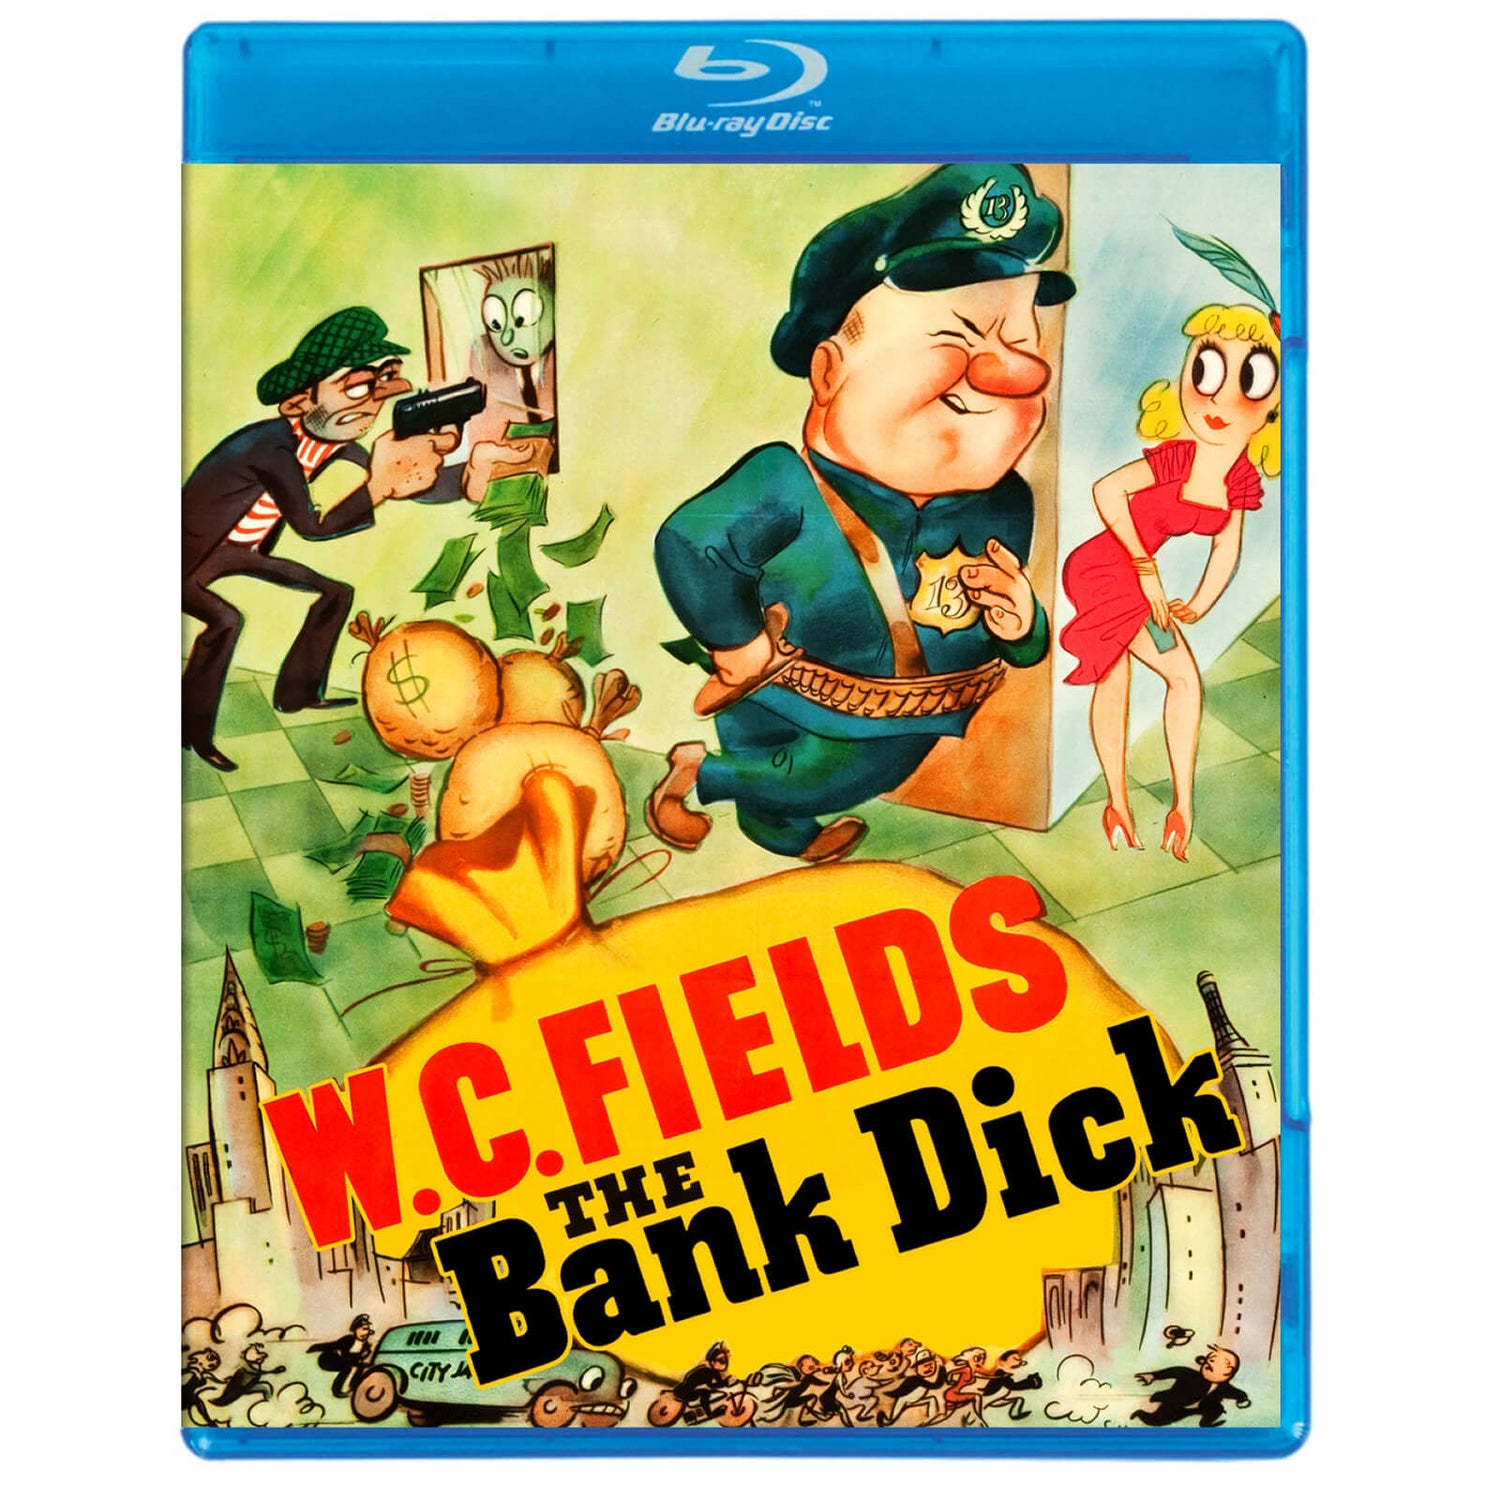 The Bank Dick (US Import)